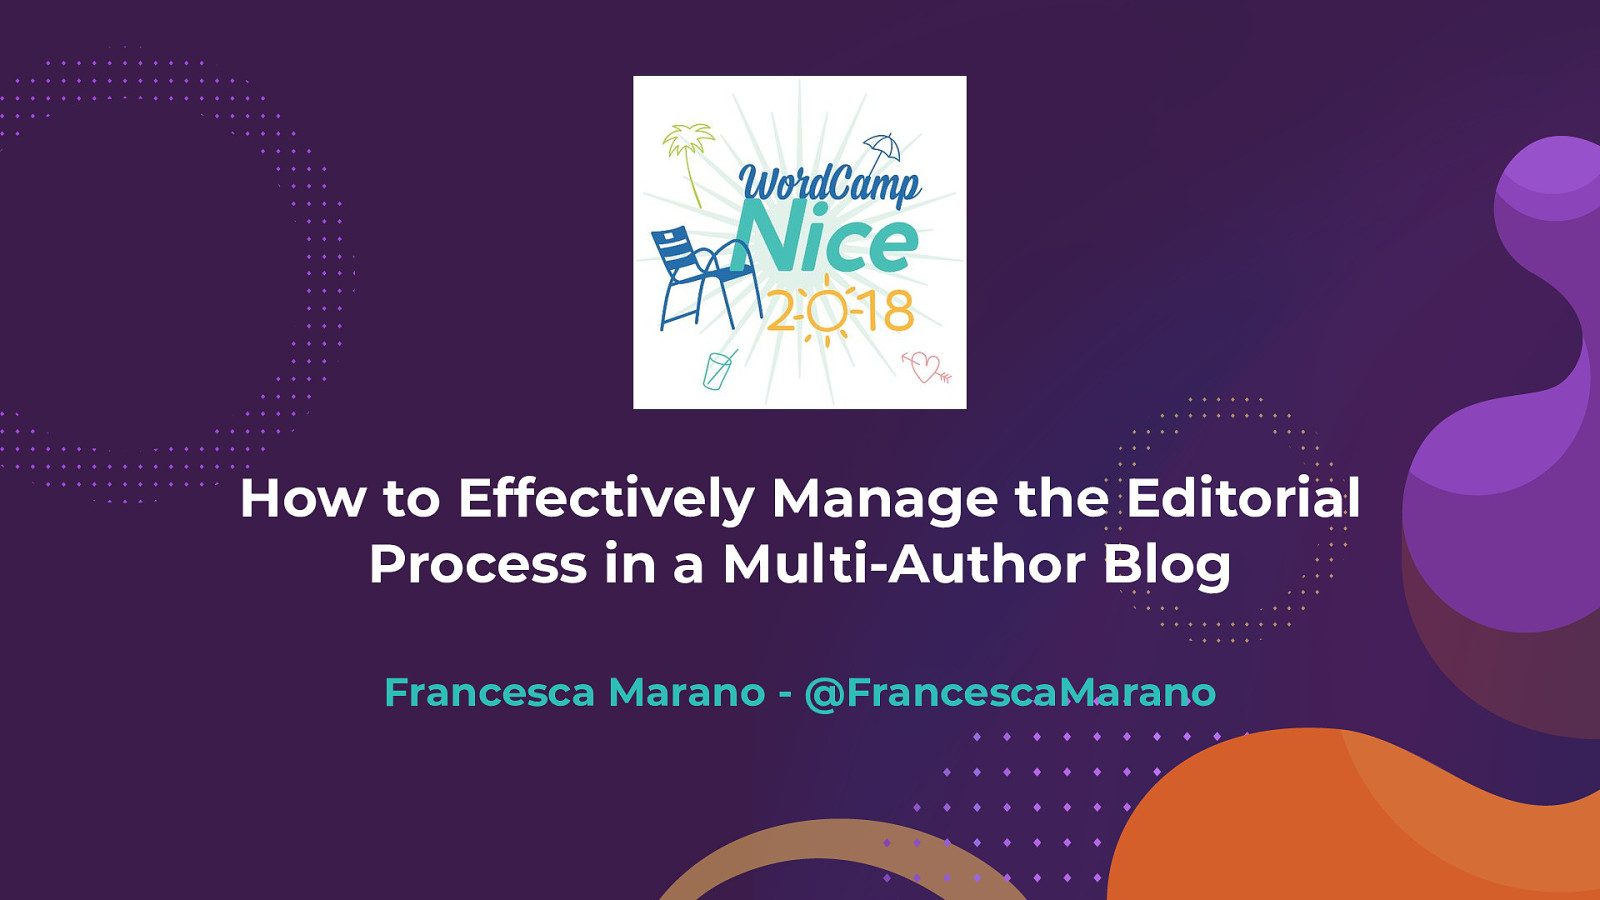 How to Effectively Manage the Editorial Process in a Multi-Author Blog